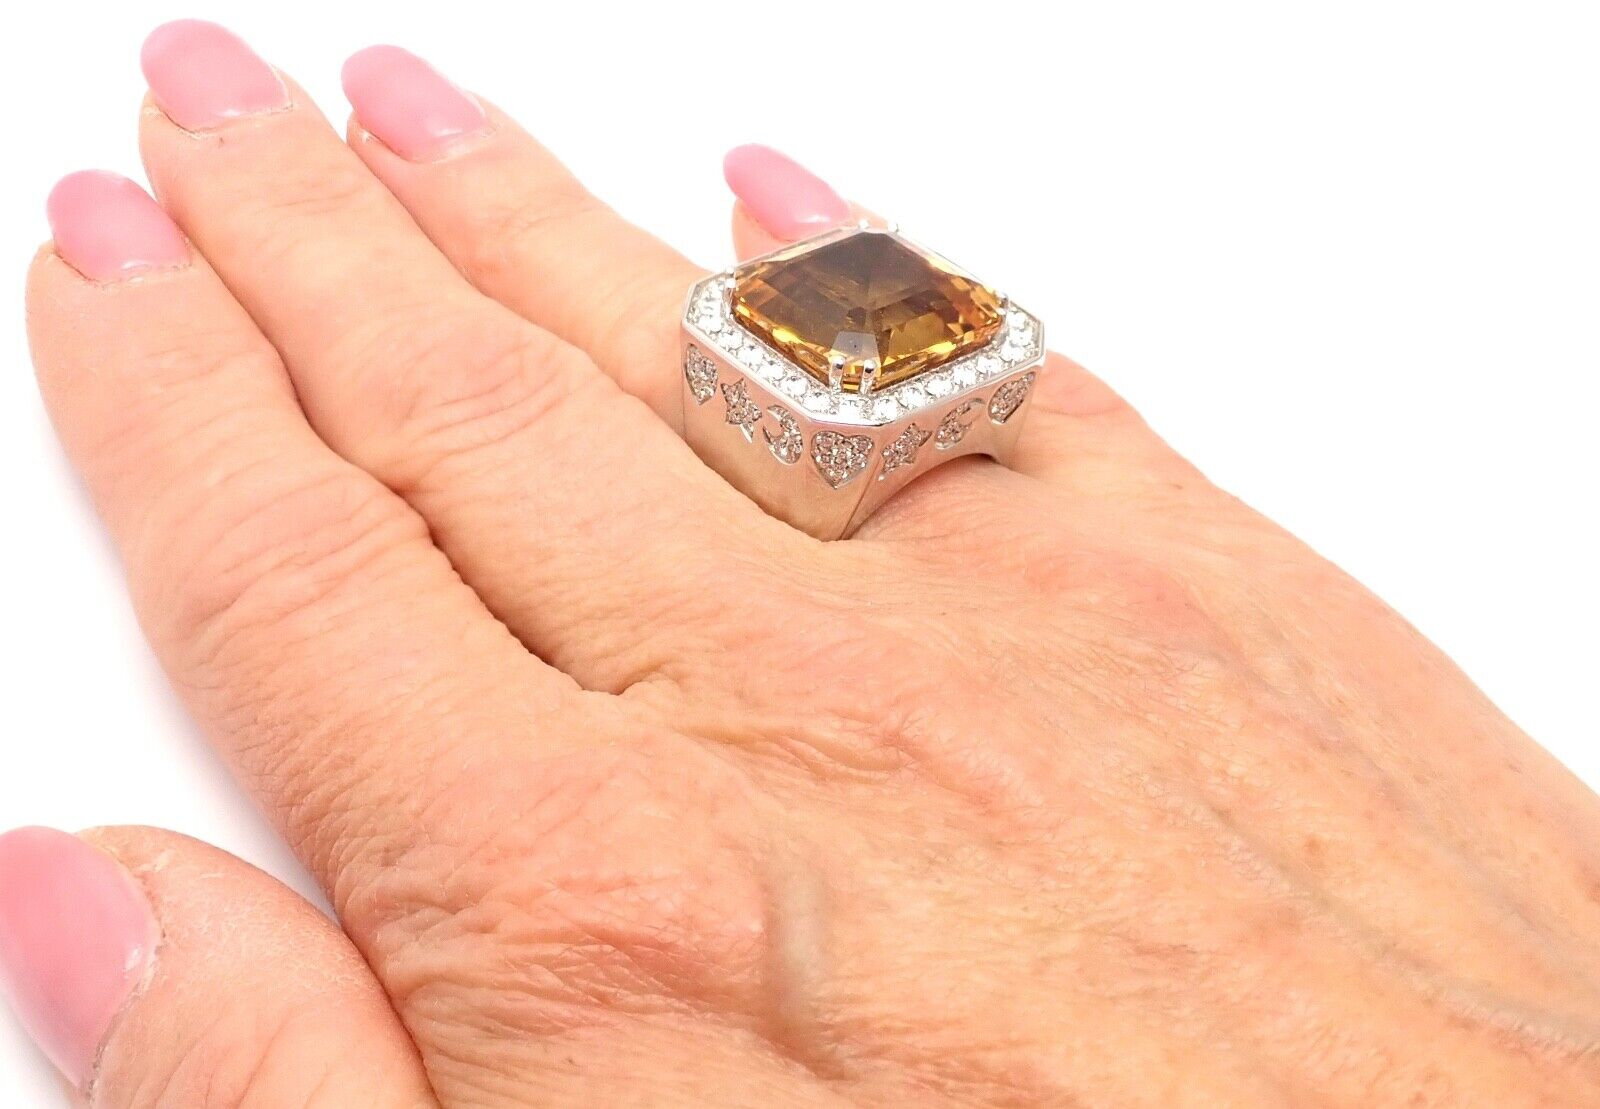 PASQUALE BRUNI Jewelry & Watches:Fine Jewelry:Rings Authentic! Pasquale Bruni 18k White Gold Diamond Citrine Large Ring